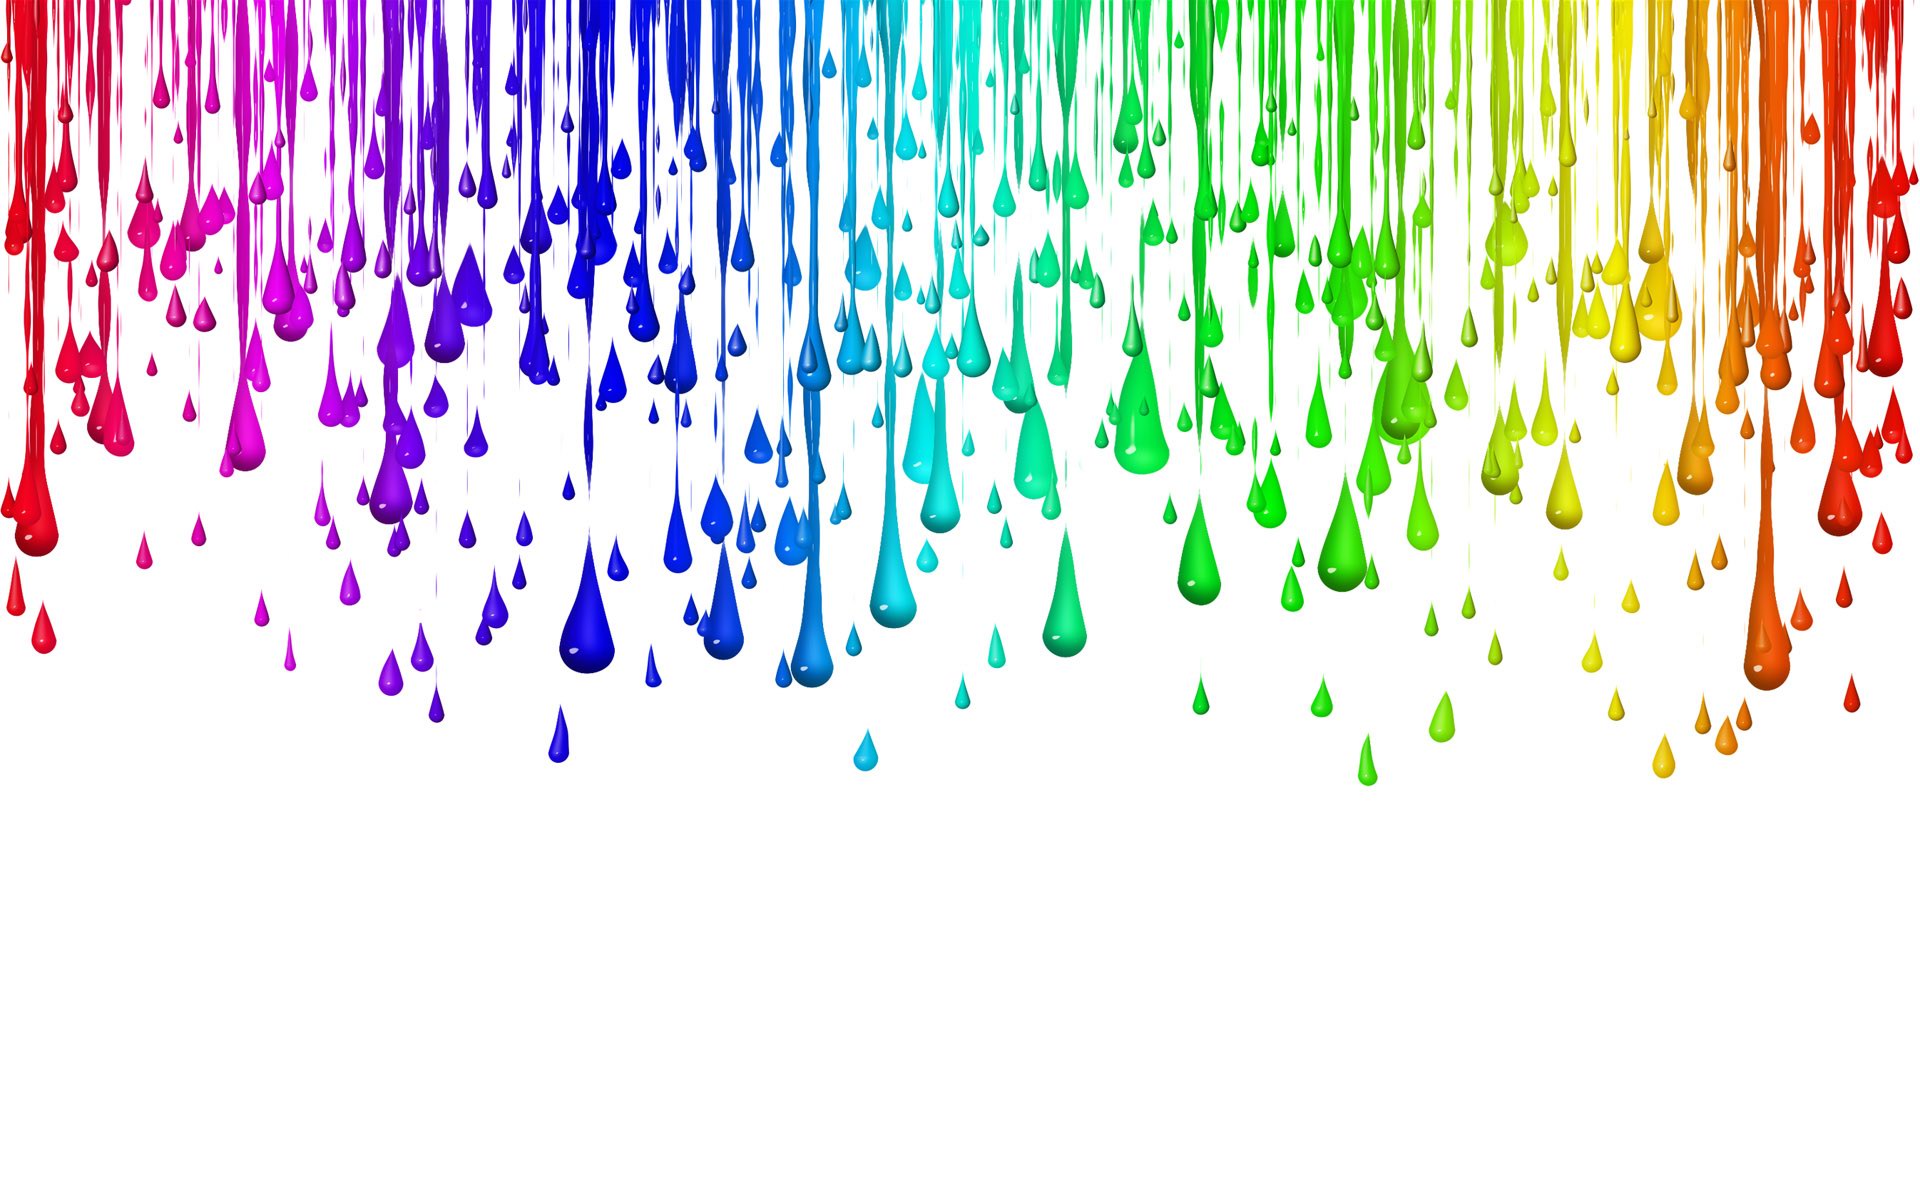 Colorful Drops of Water Wallpaper Background